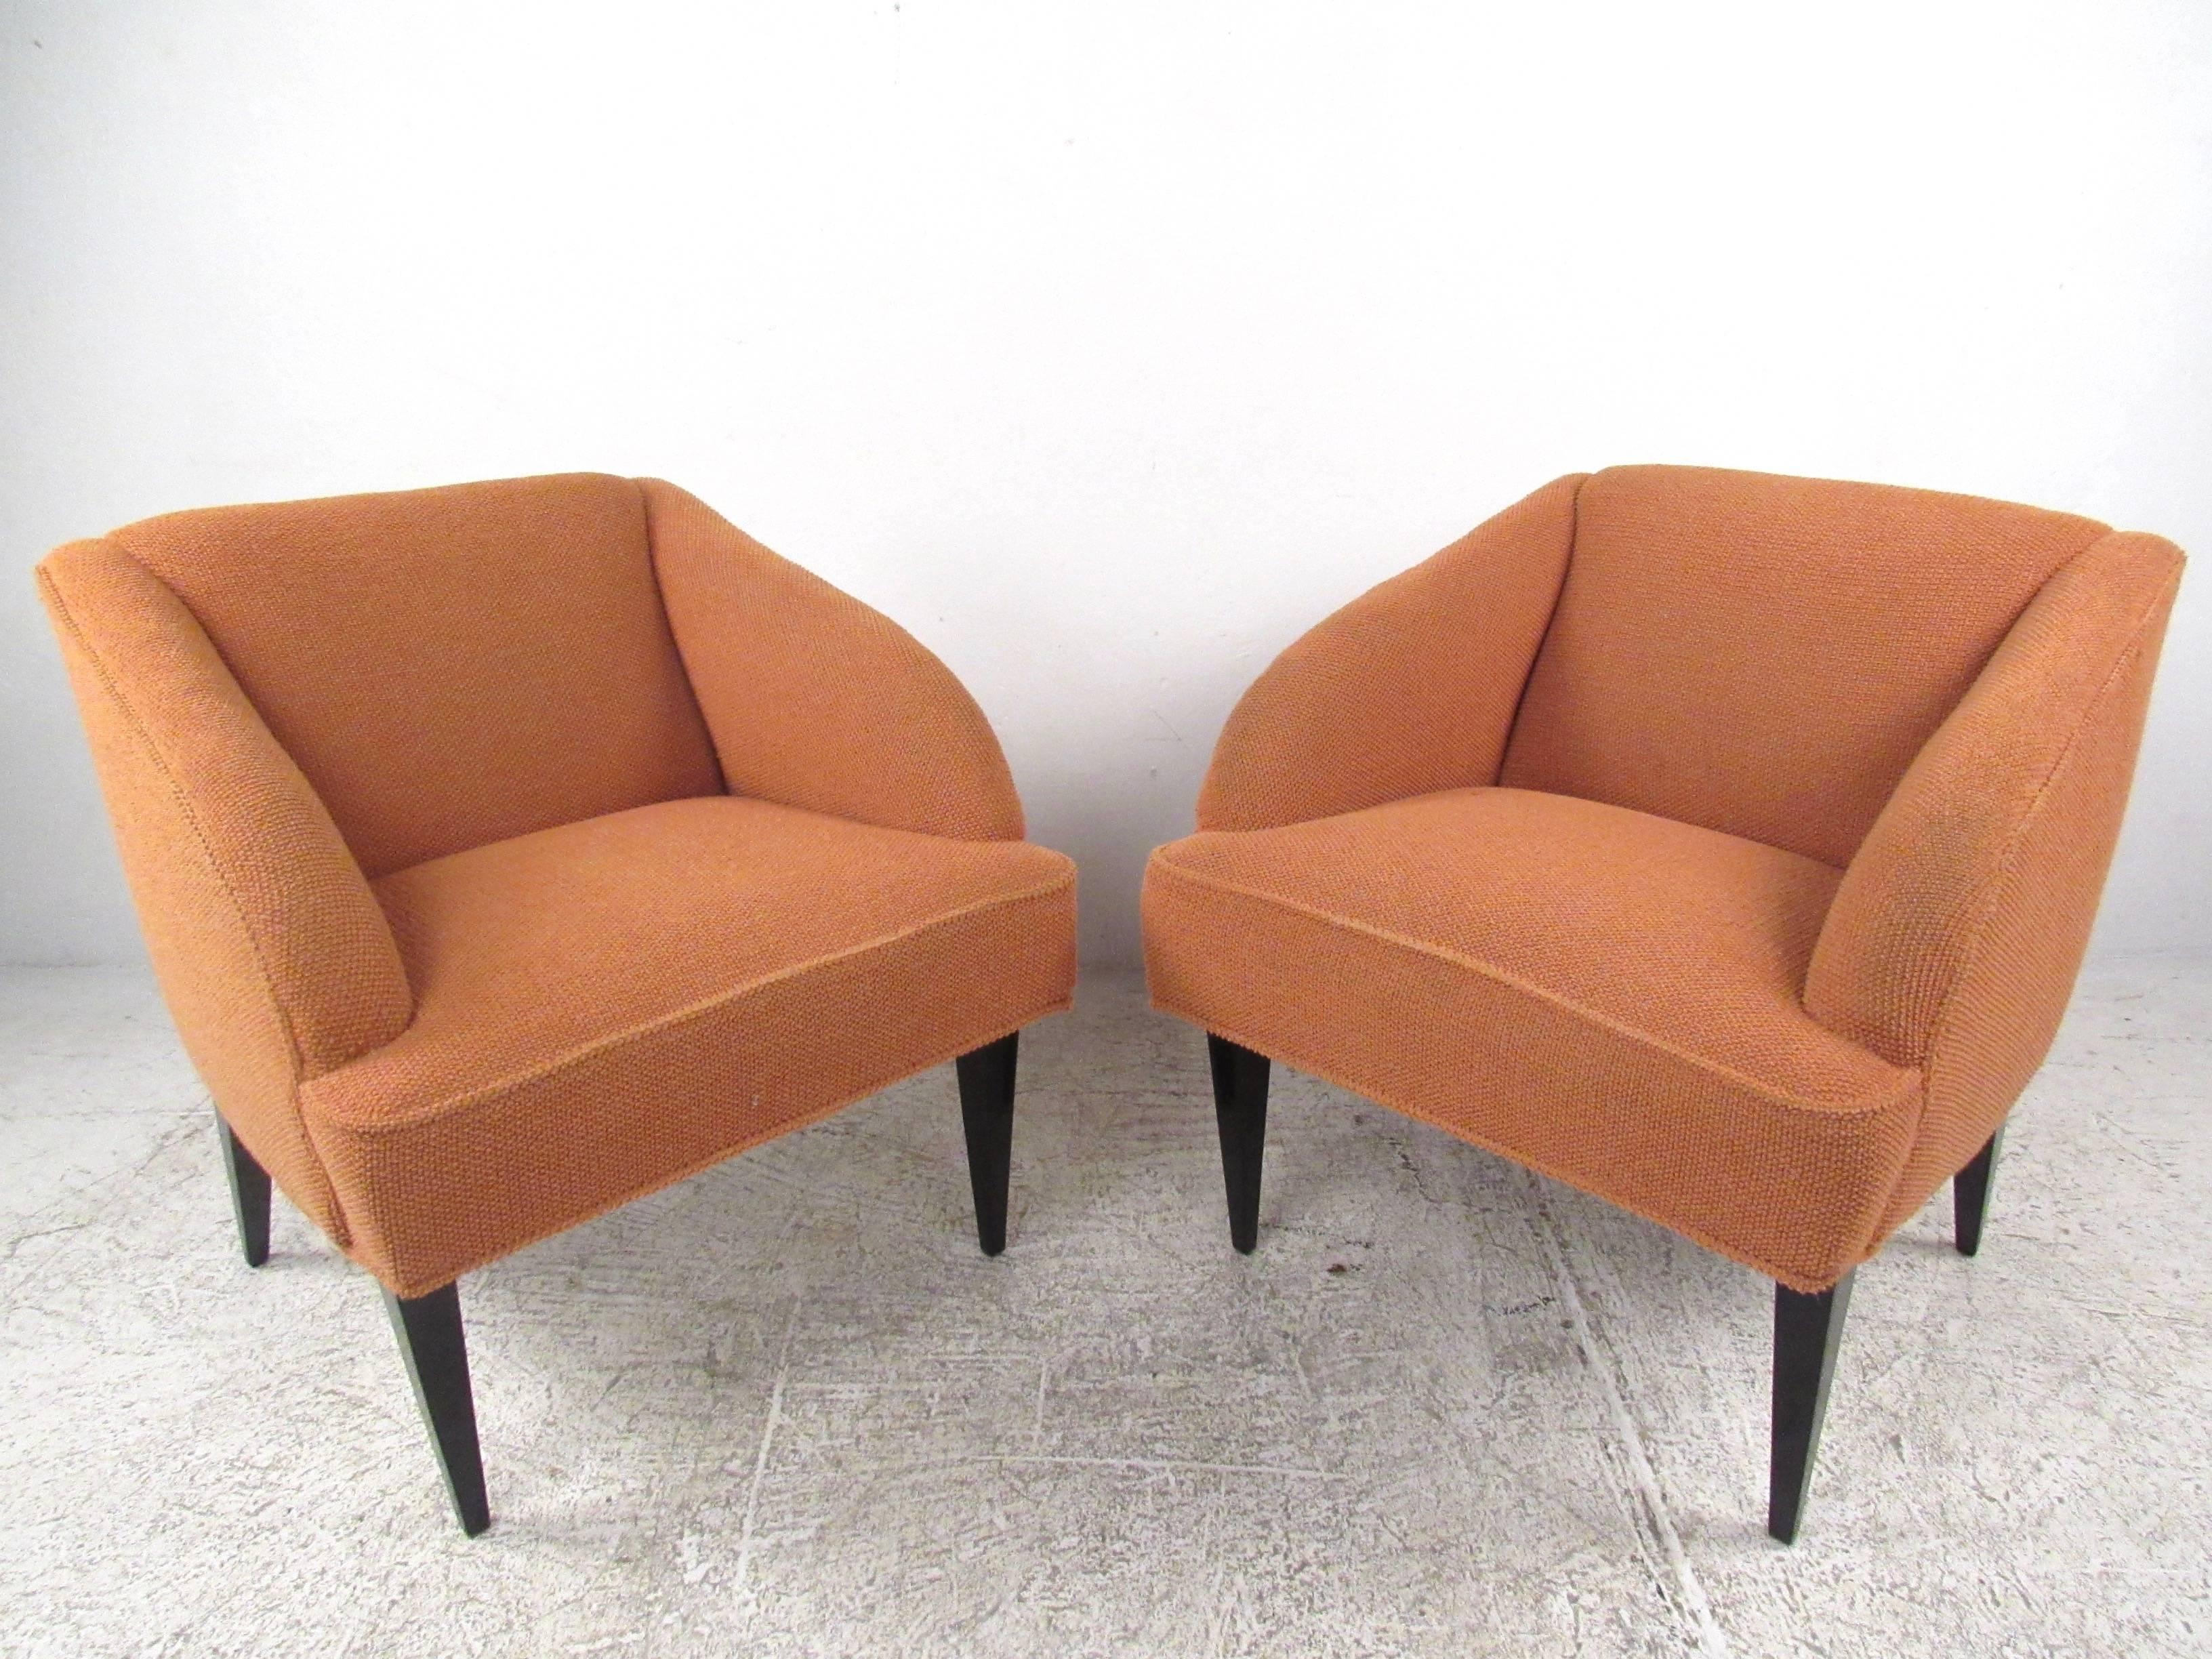 This unique pair of mid-century modern lounge chairs features comfortable rounded seat backs, tapered black lacquer legs and uniquely modern sculpted design. Impressive pair of upholstered lounge chairs makes a stylish addition to any seating